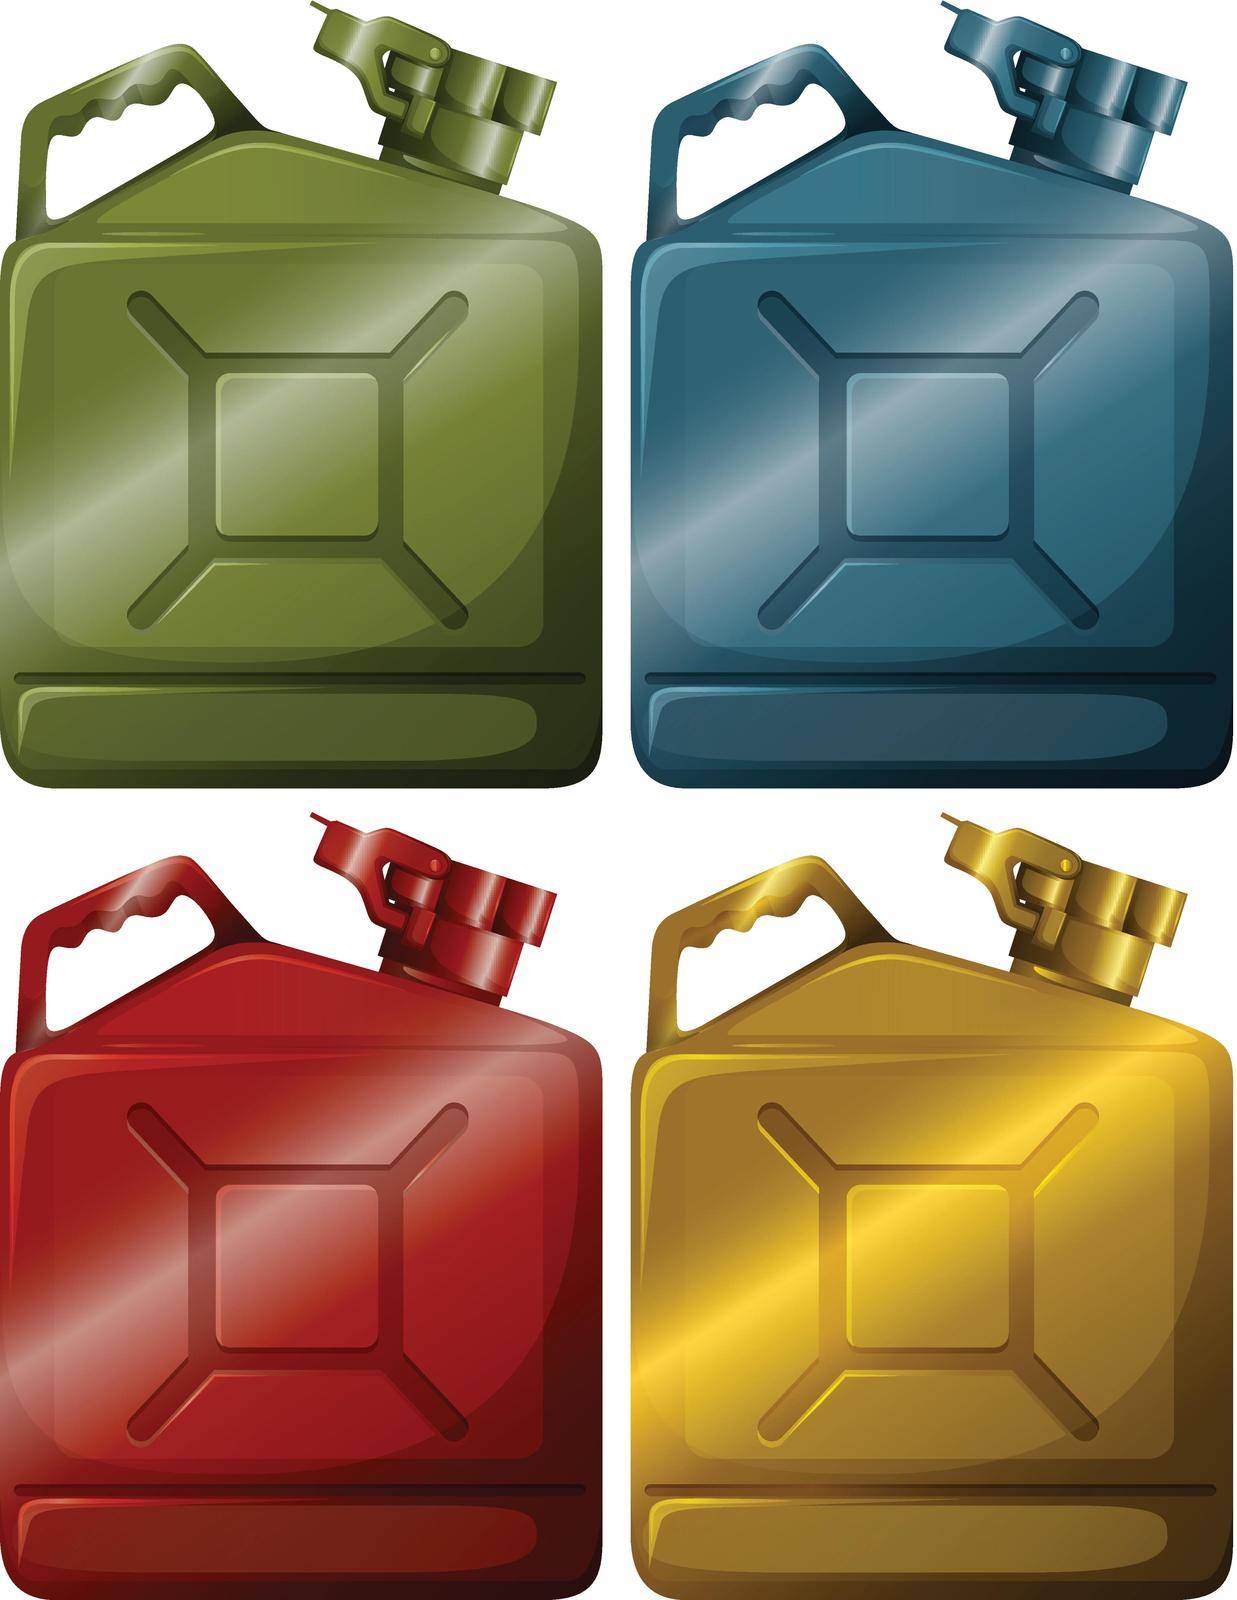 Gasoline containers by iimages